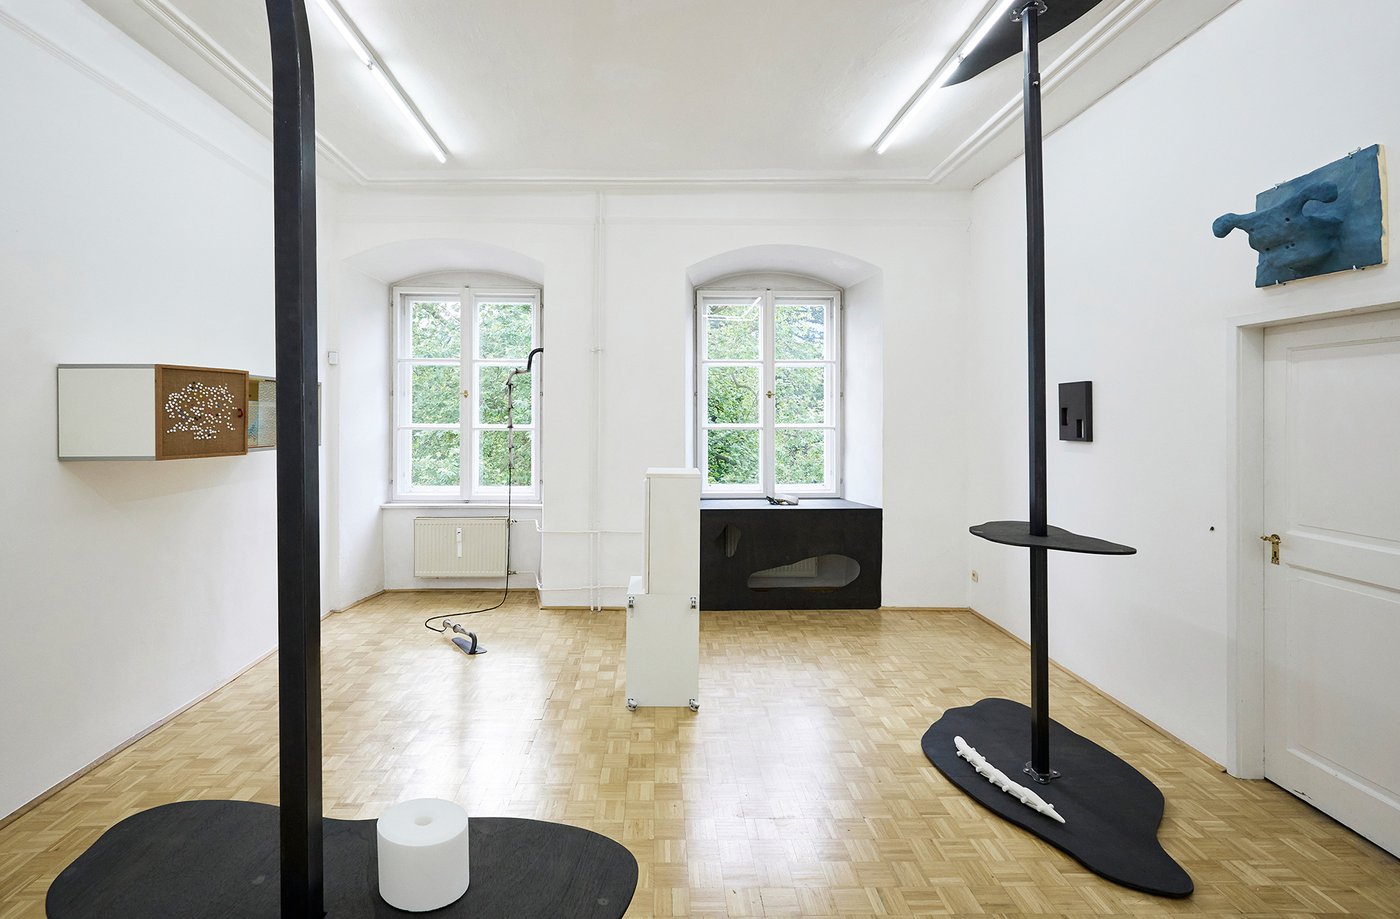 installation view in a room